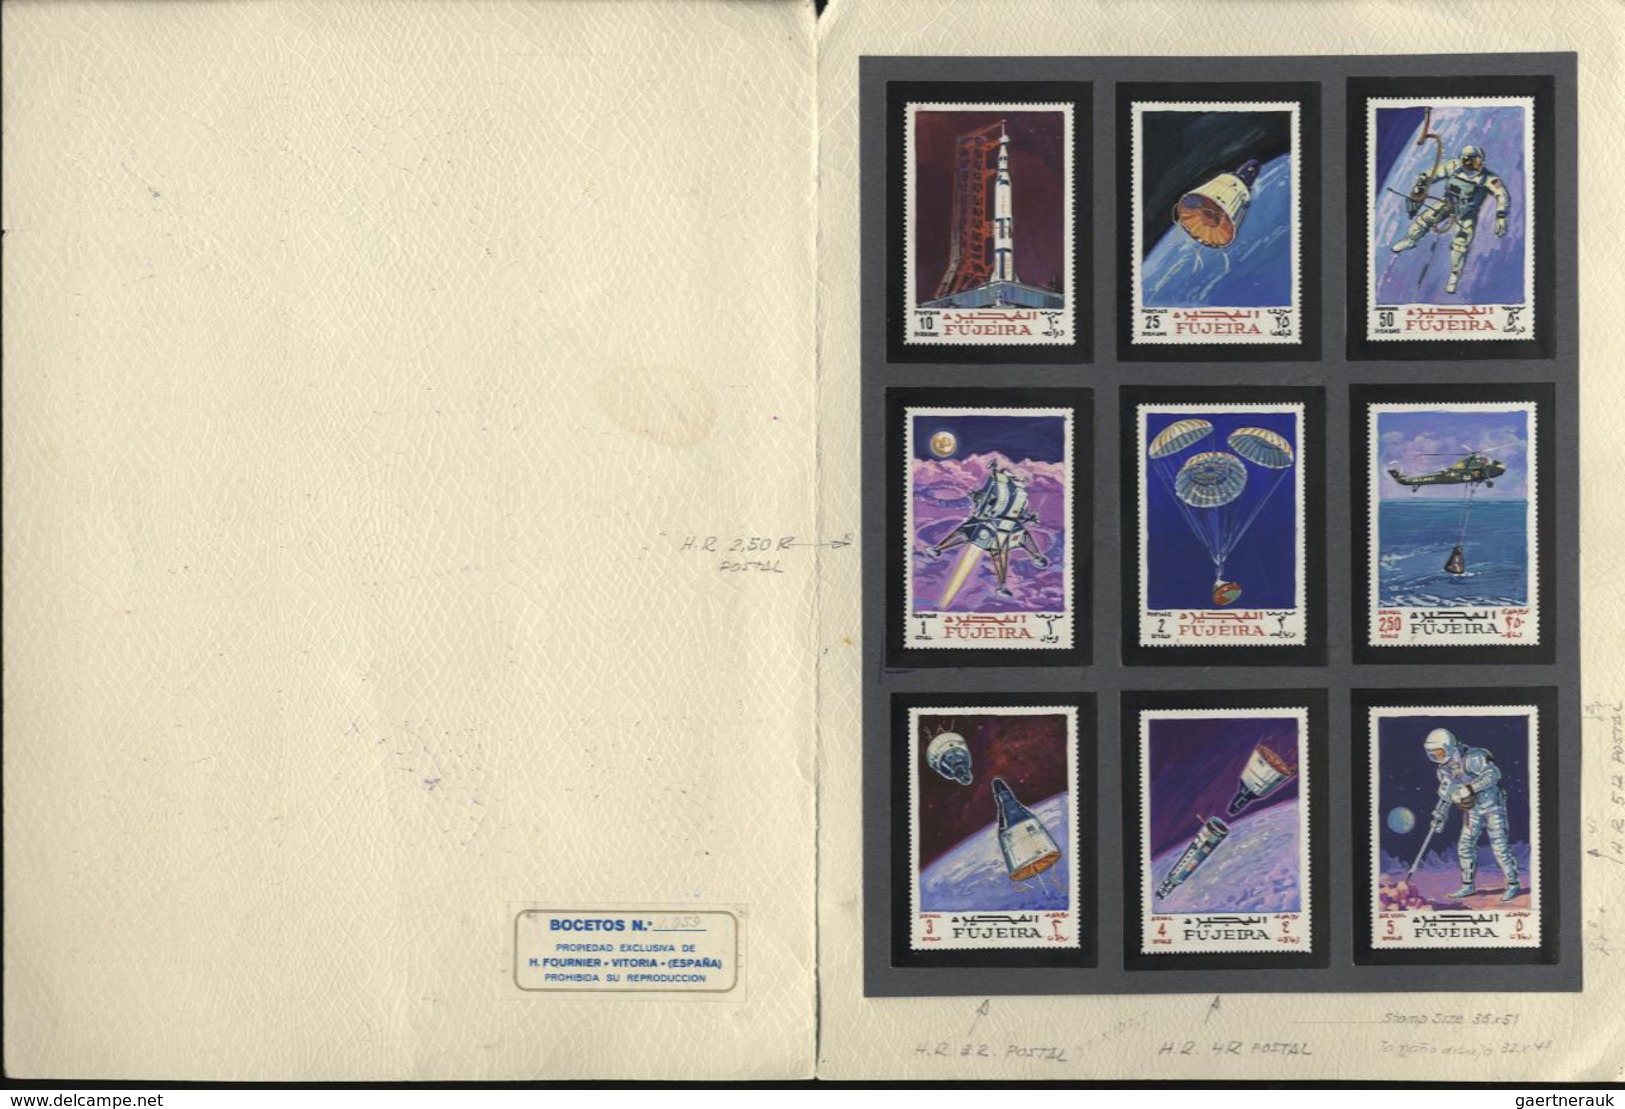 Fudschaira / Fujeira: 1969, ASTRONAUTICS, Booklet With Drawings Of The Complet Set Of Stamps (9 Valu - Fujeira